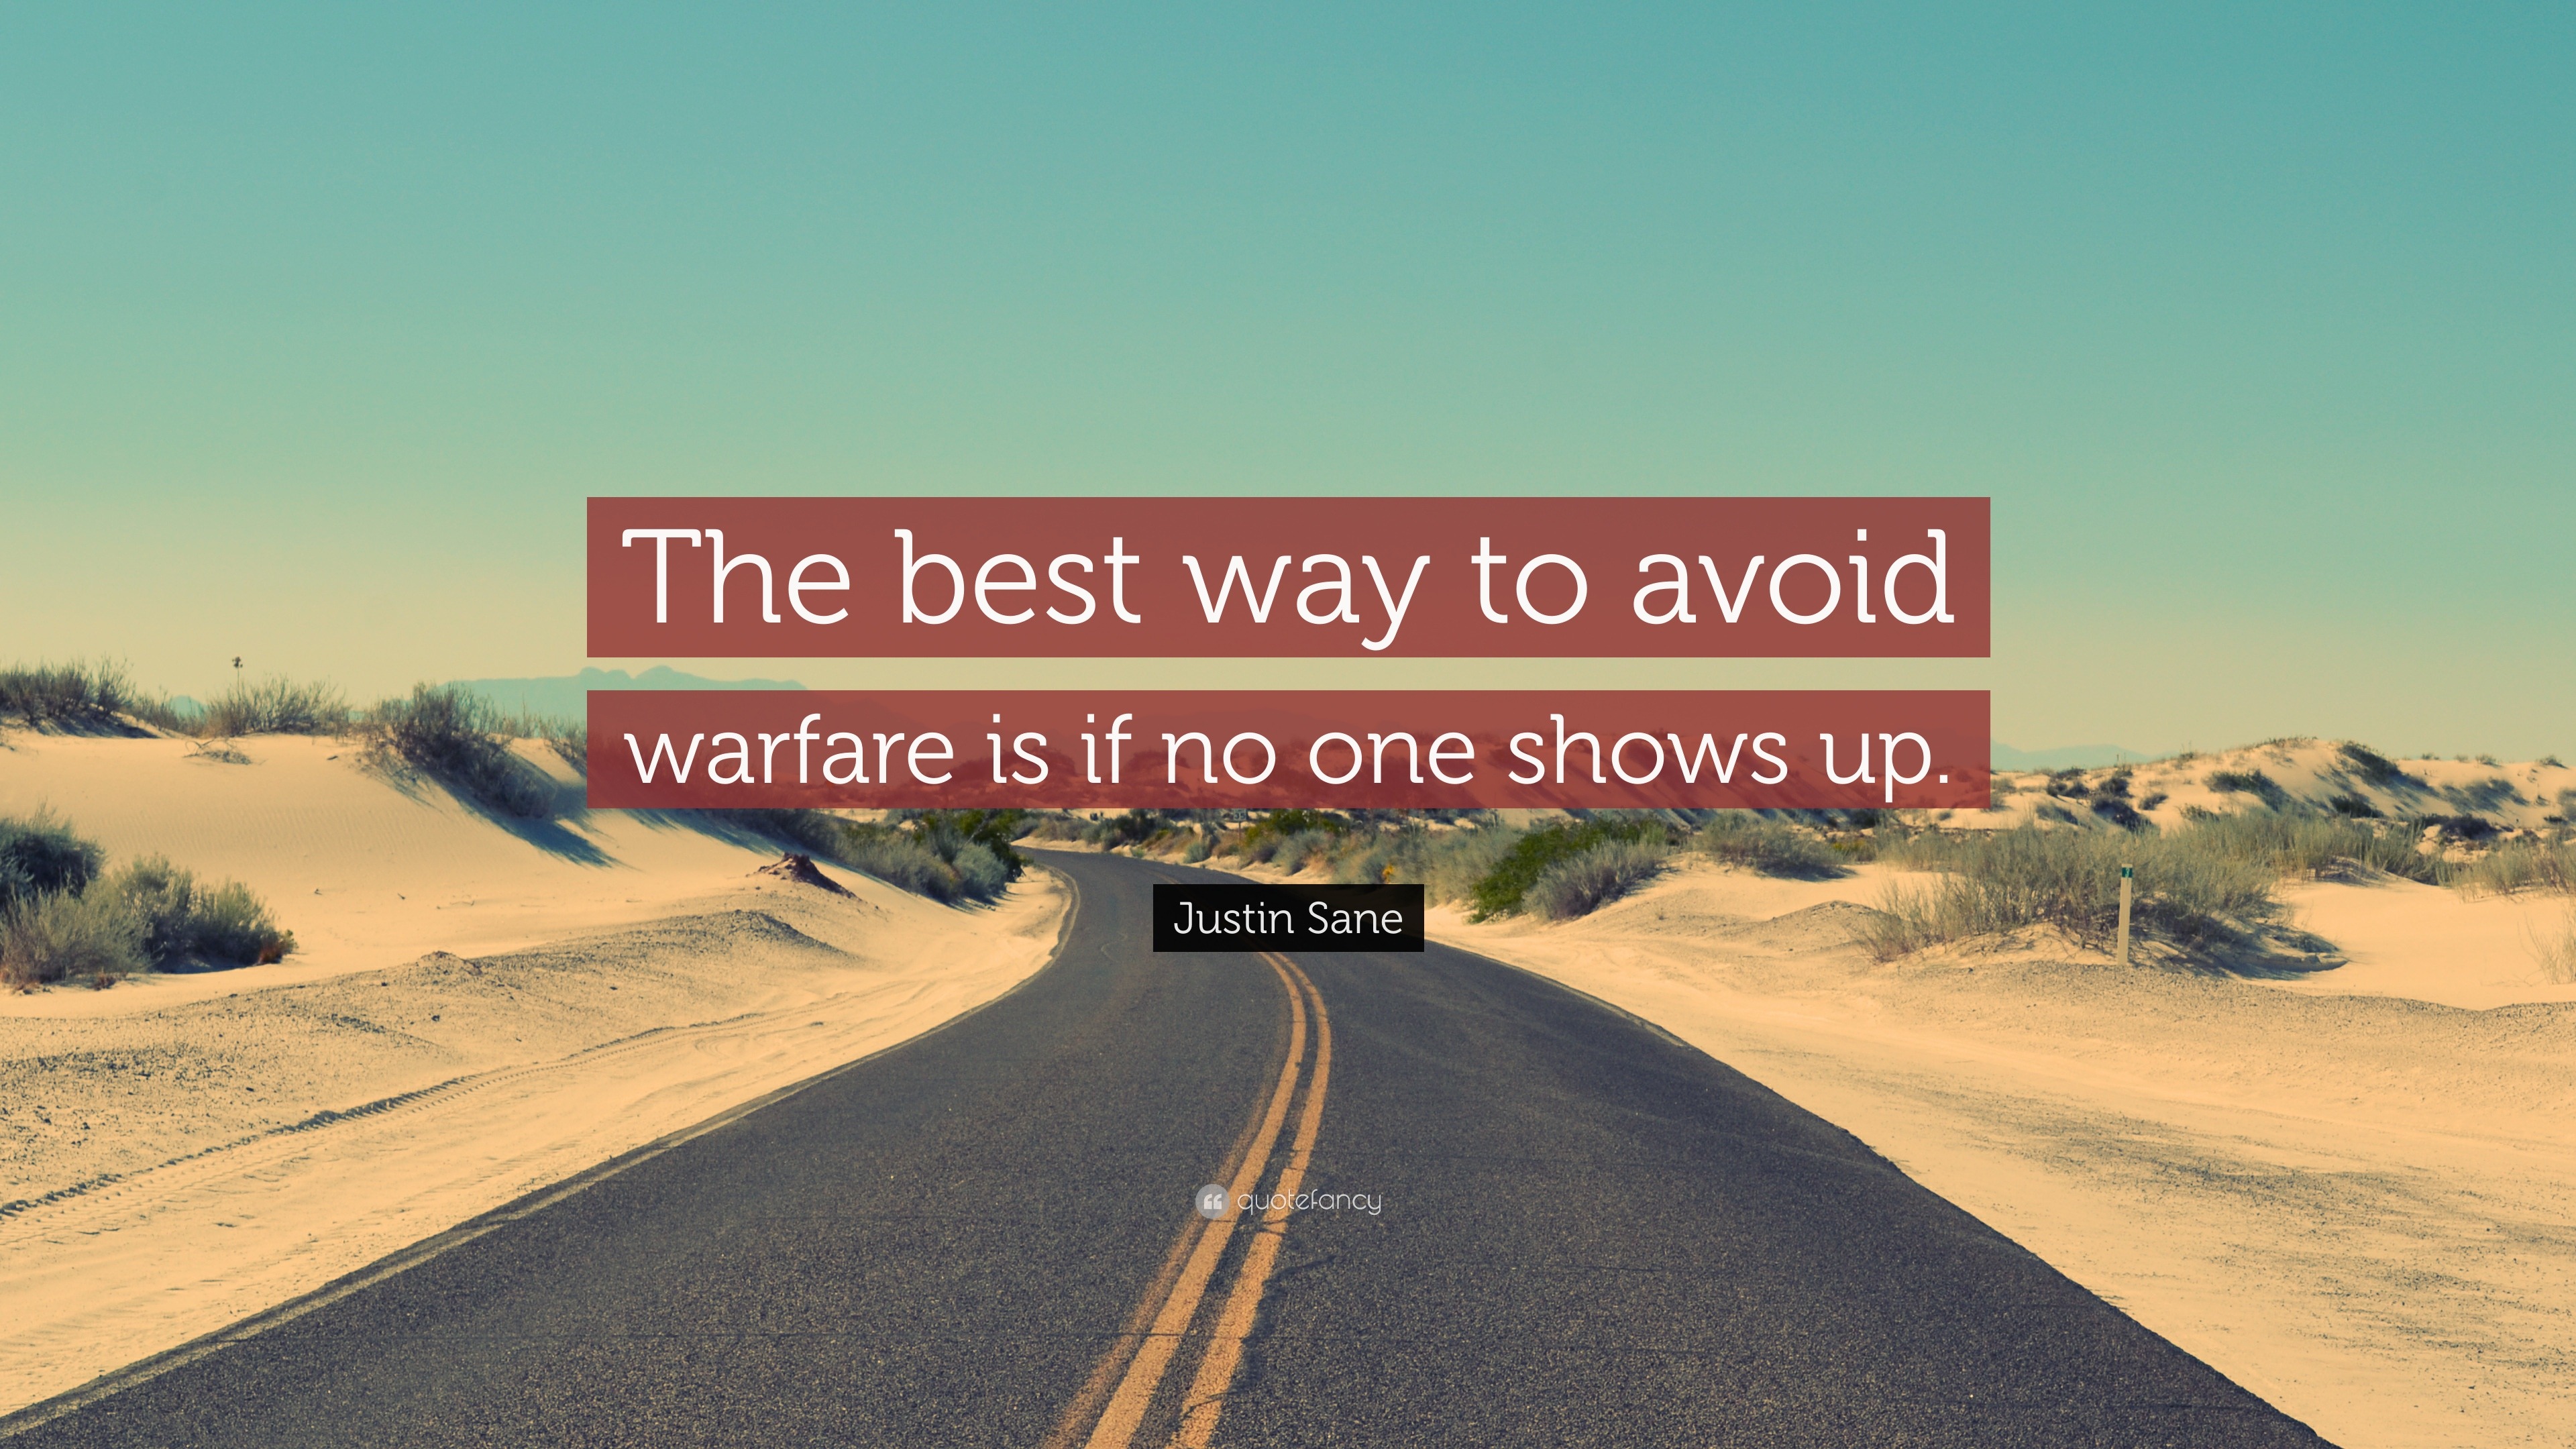 https://quotefancy.com/media/wallpaper/3840x2160/1494735-Justin-Sane-Quote-The-best-way-to-avoid-warfare-is-if-no-one-shows.jpg